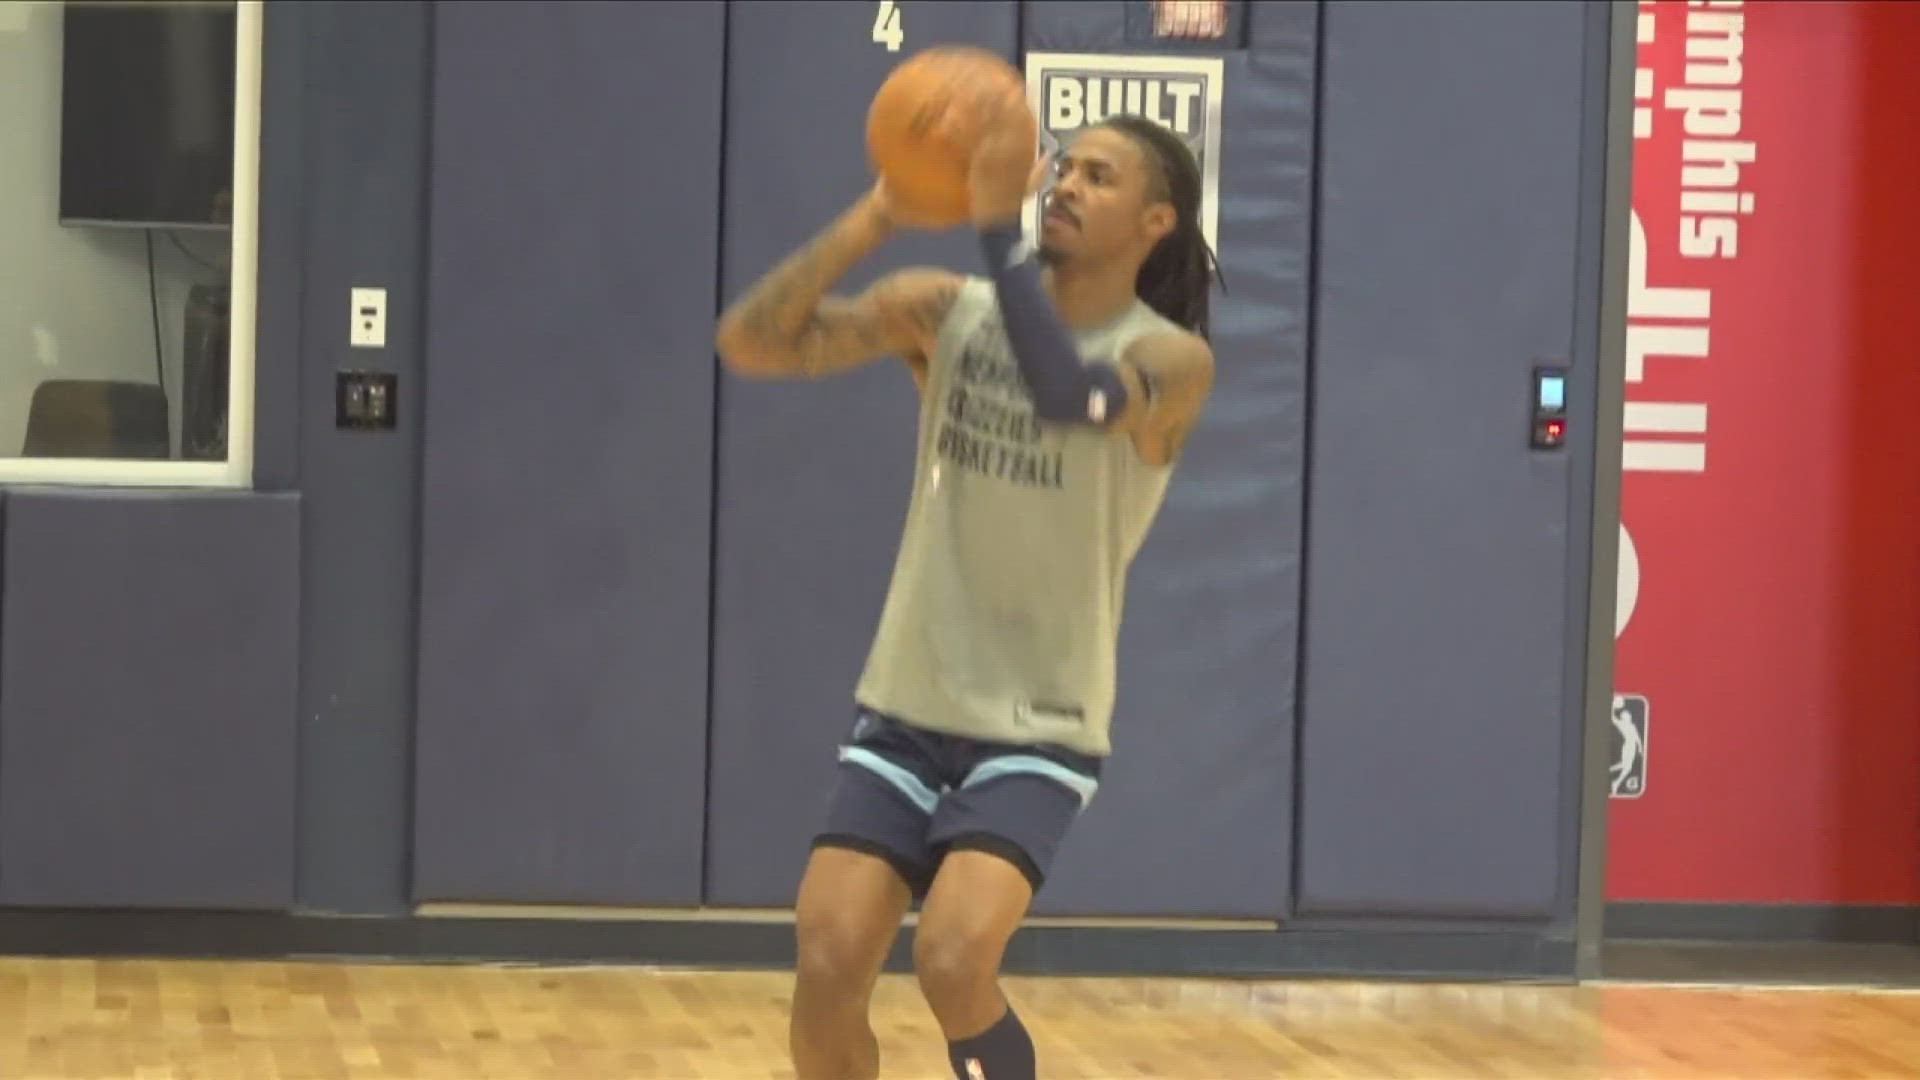 As Ja Morant prepares to return to the Grizzlies' court in just over a week, his lawyers are preparing for the courtroom Monday.